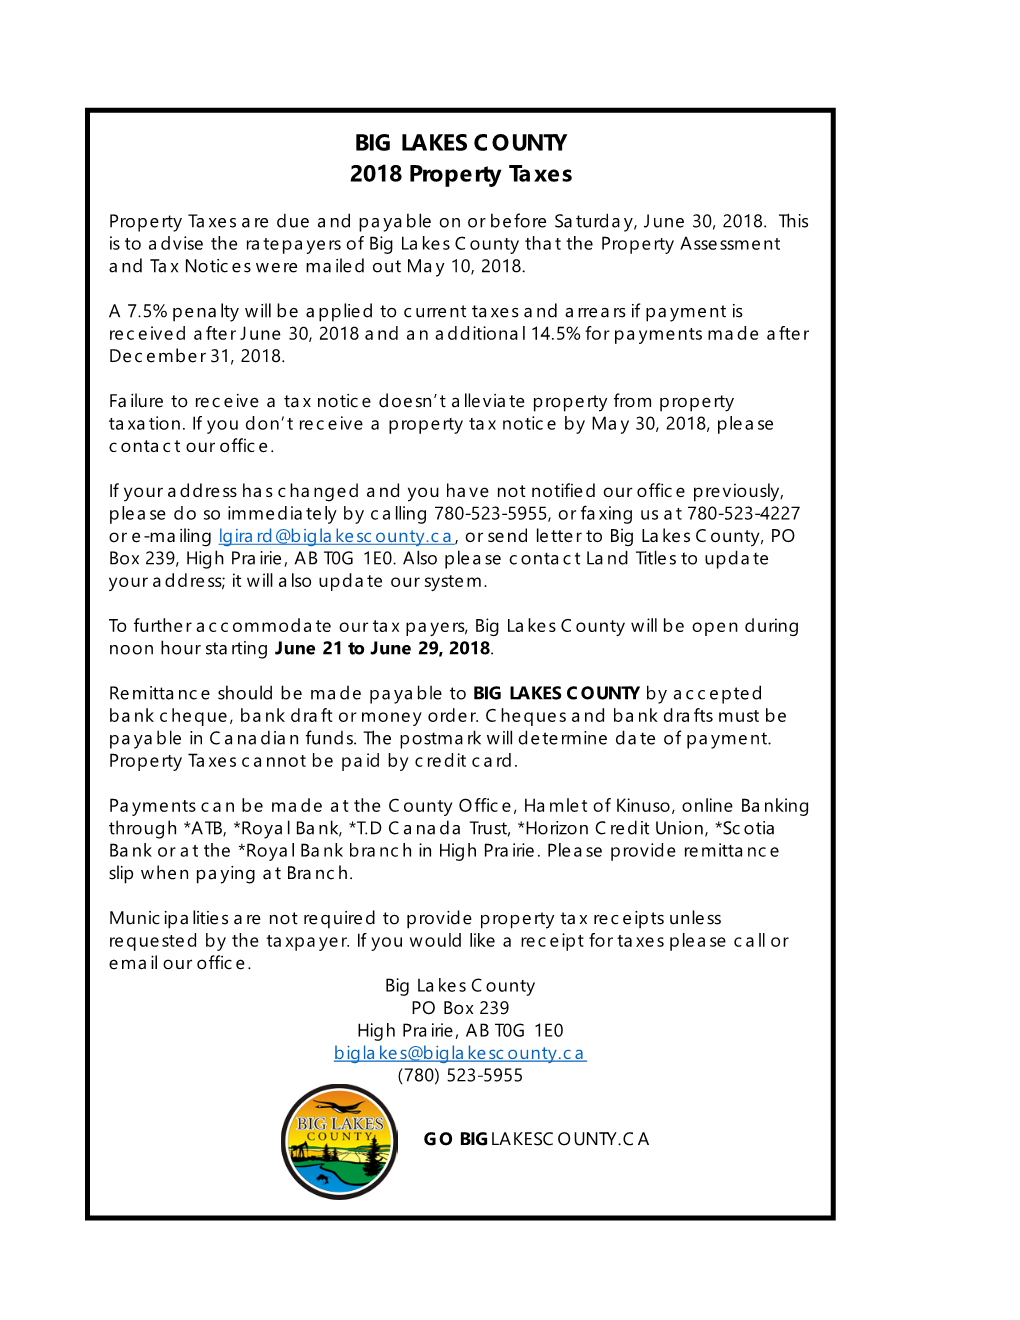 BIG LAKES COUNTY 2018 Property Taxes Property Taxes Are Due and Payable on Or Before Saturday, June 30, 2018